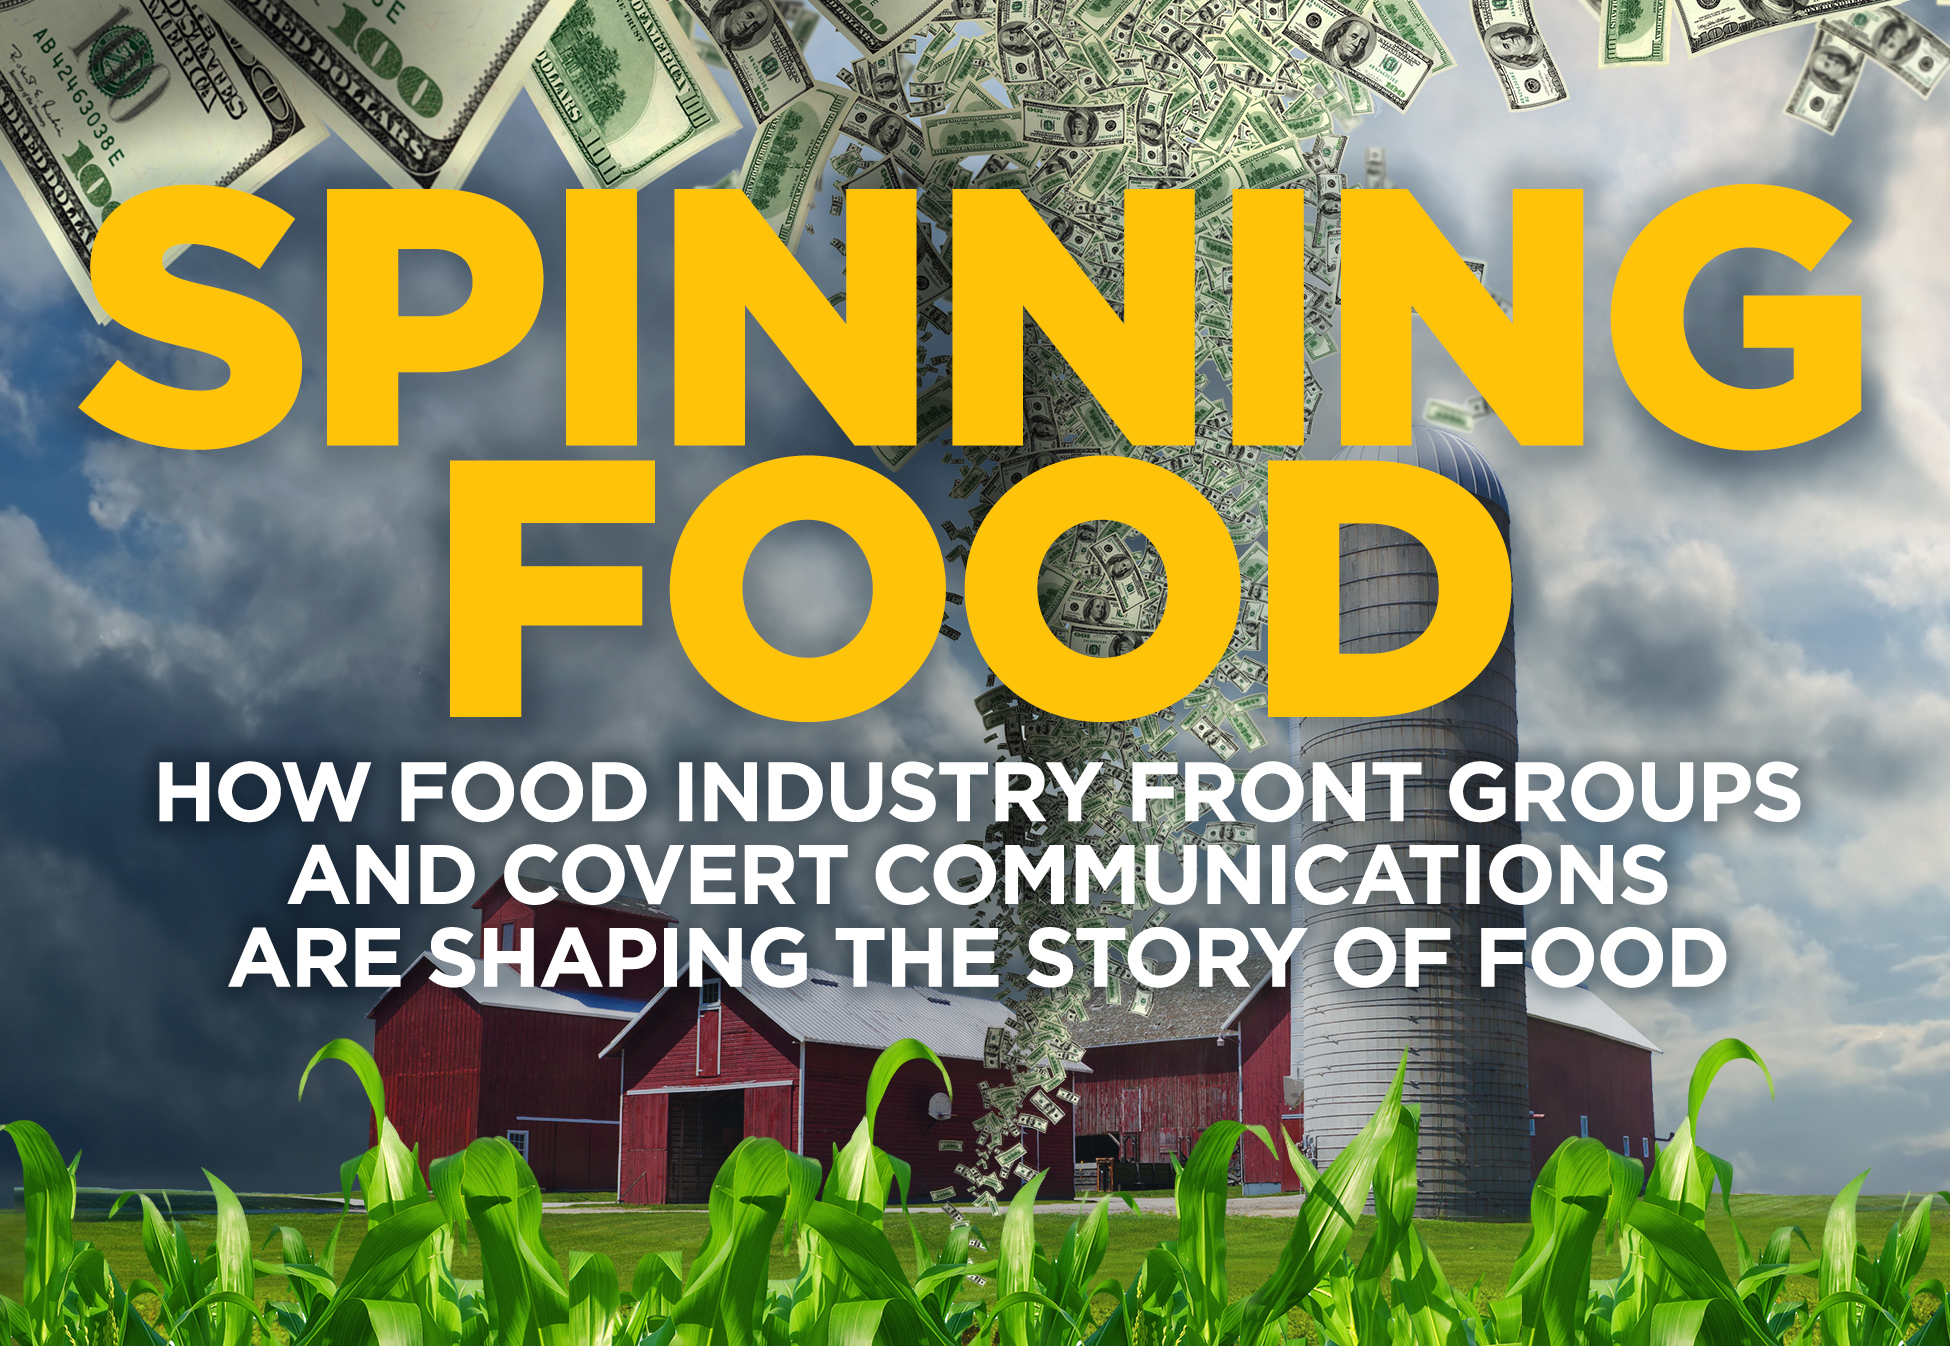 New Report: Spinning Food